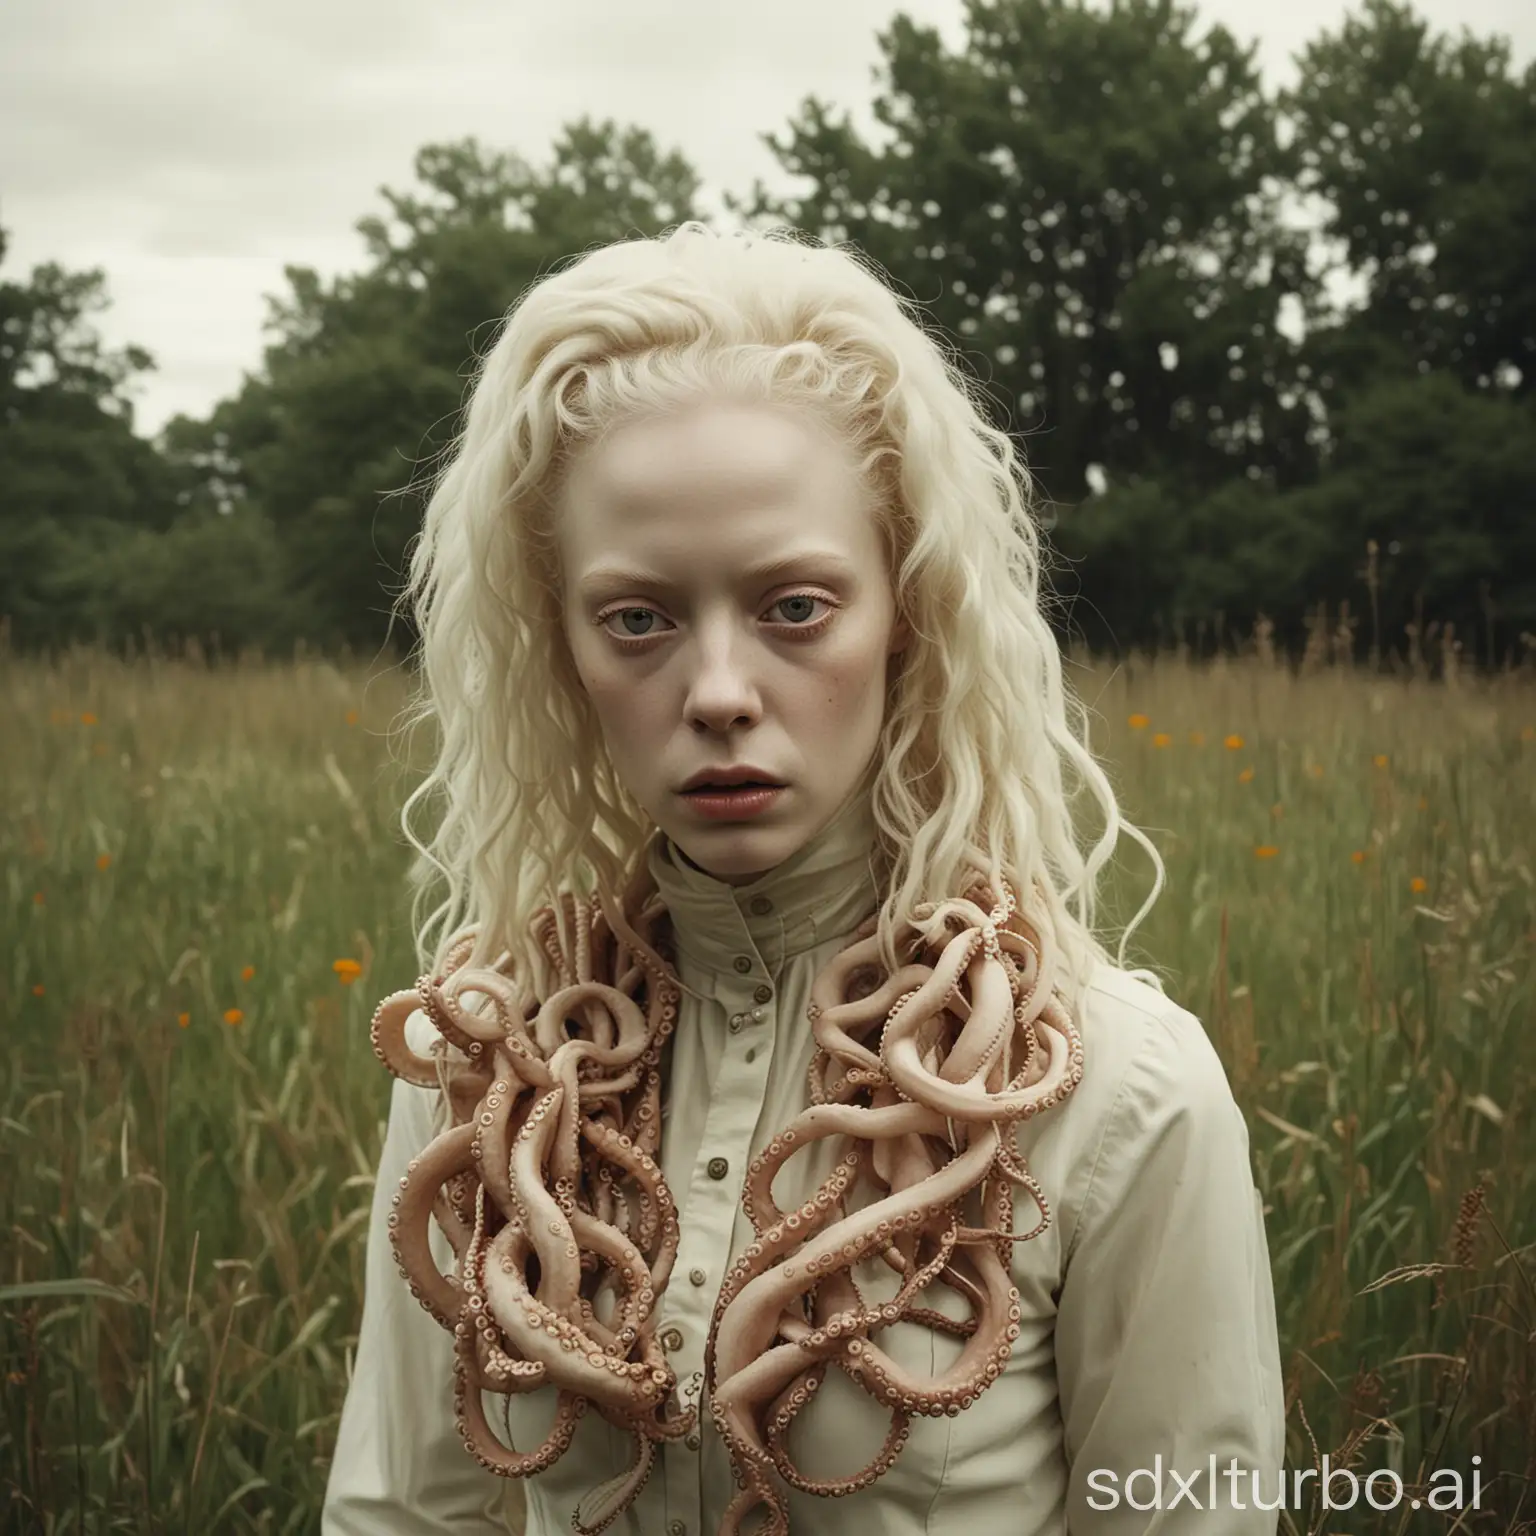 Portrait photography, early 1970’s esthetics, sinister menacing albino female, octopus head, vintage clothes, in meadow, unsettling environment, color palette dominated by muted, earthy tone, experimental horror film style, adds an intriguing and otherworldly element, natural light, stressful environment, nature photography, cinematic film rendering, full grained image evokes sense of yesteryear, heavy grained filter, RAW style